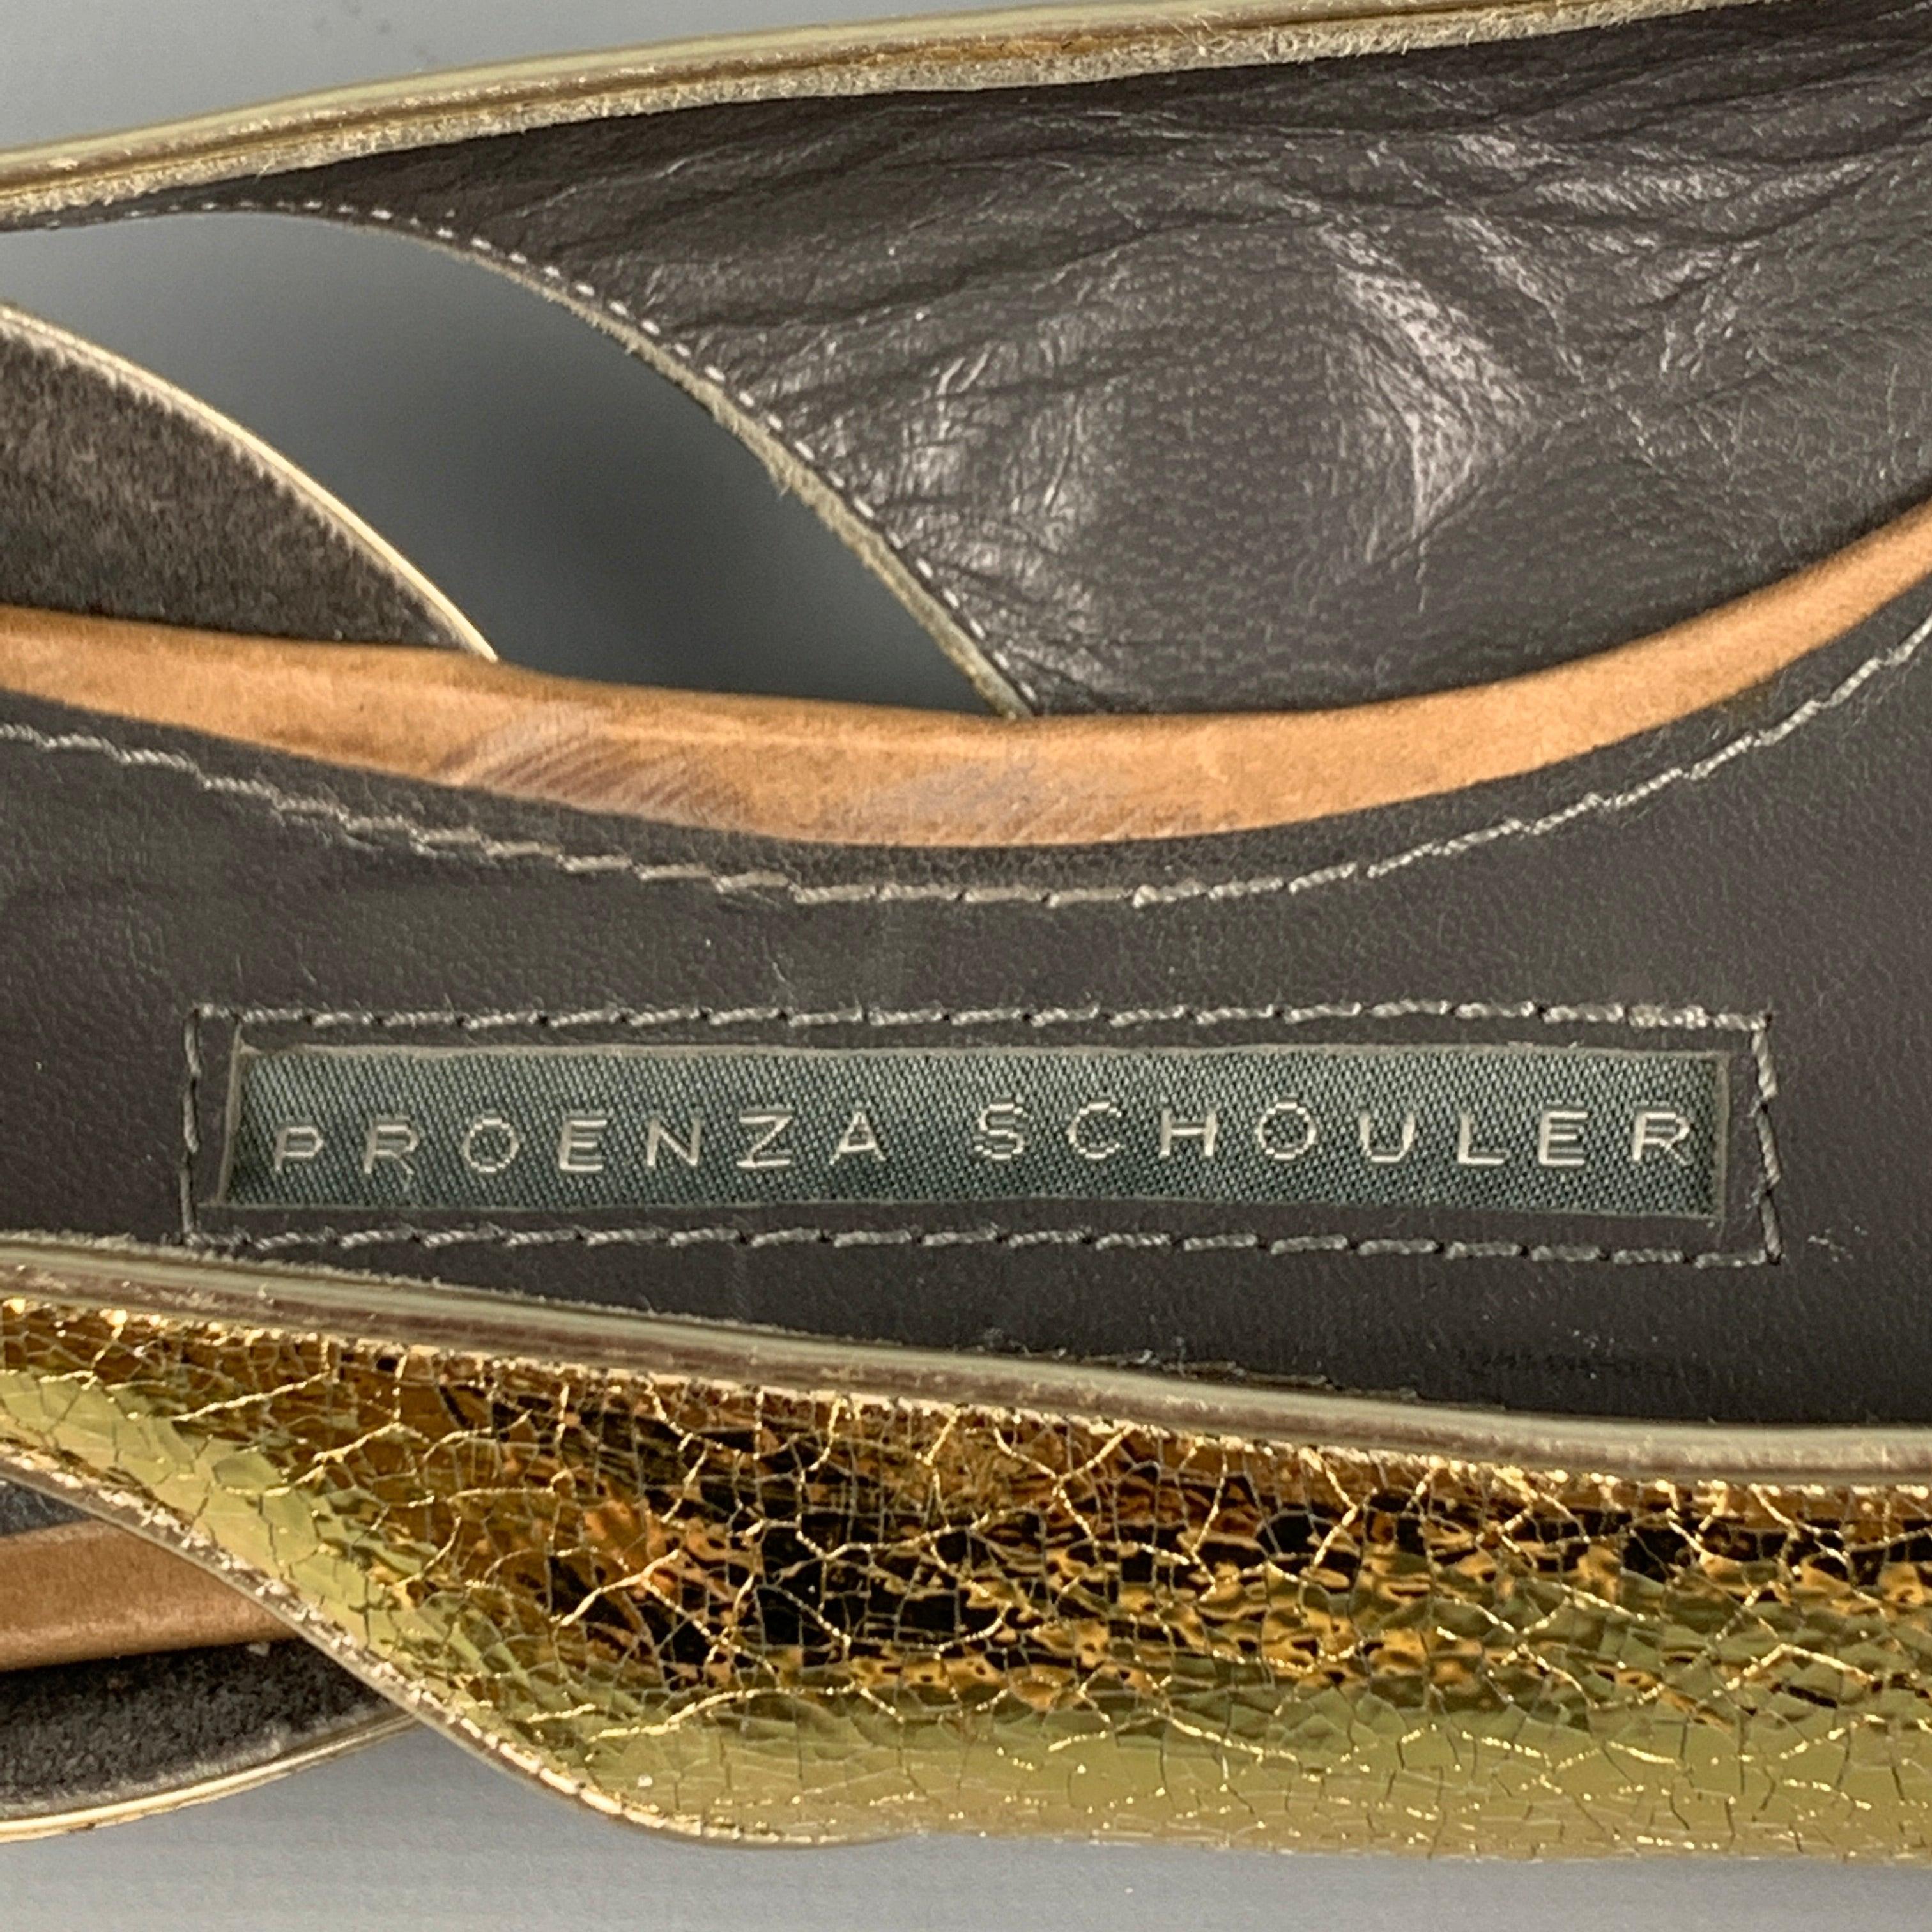 PROENZA SCHOULER Size 7 Gold Leather Metallic Flats For Sale 2